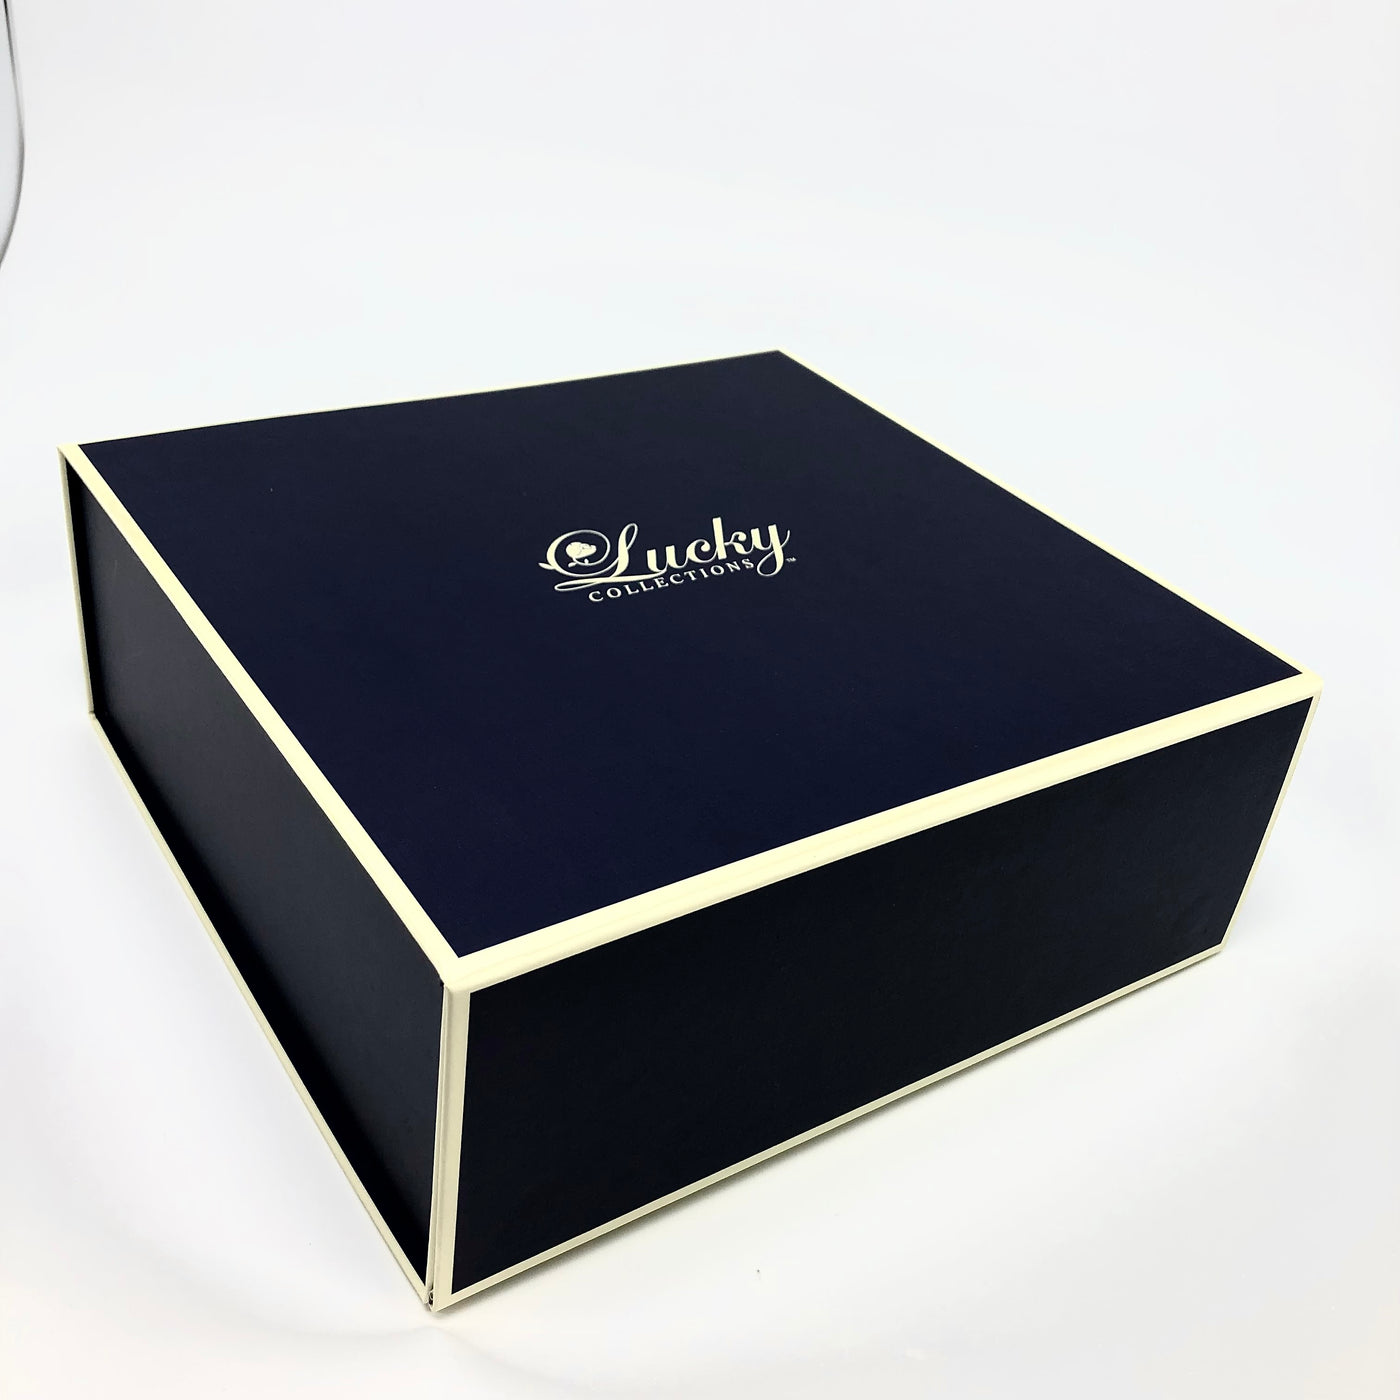 Lucky Collections ™ Tiaras come in Custom Box for convenient presentation & keepsake